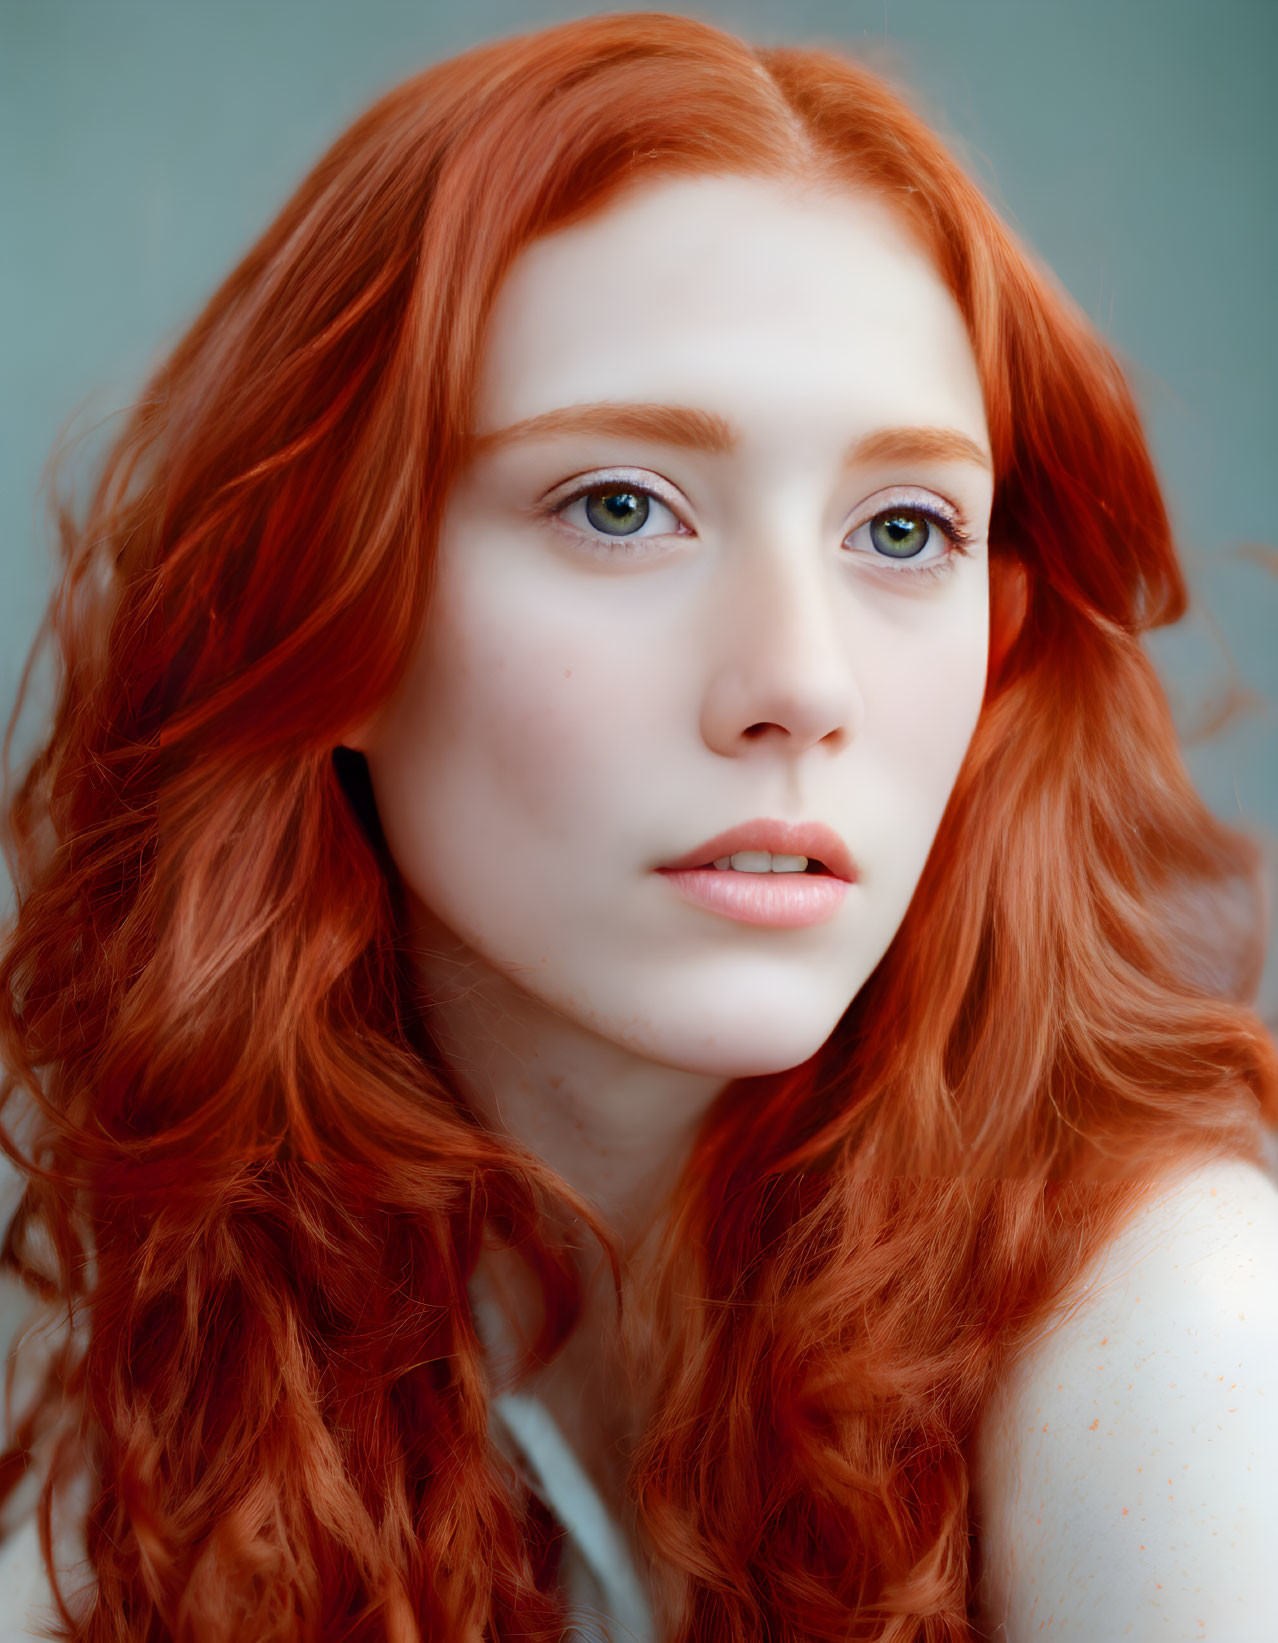 Portrait of person with long red hair, fair skin, and green eyes.